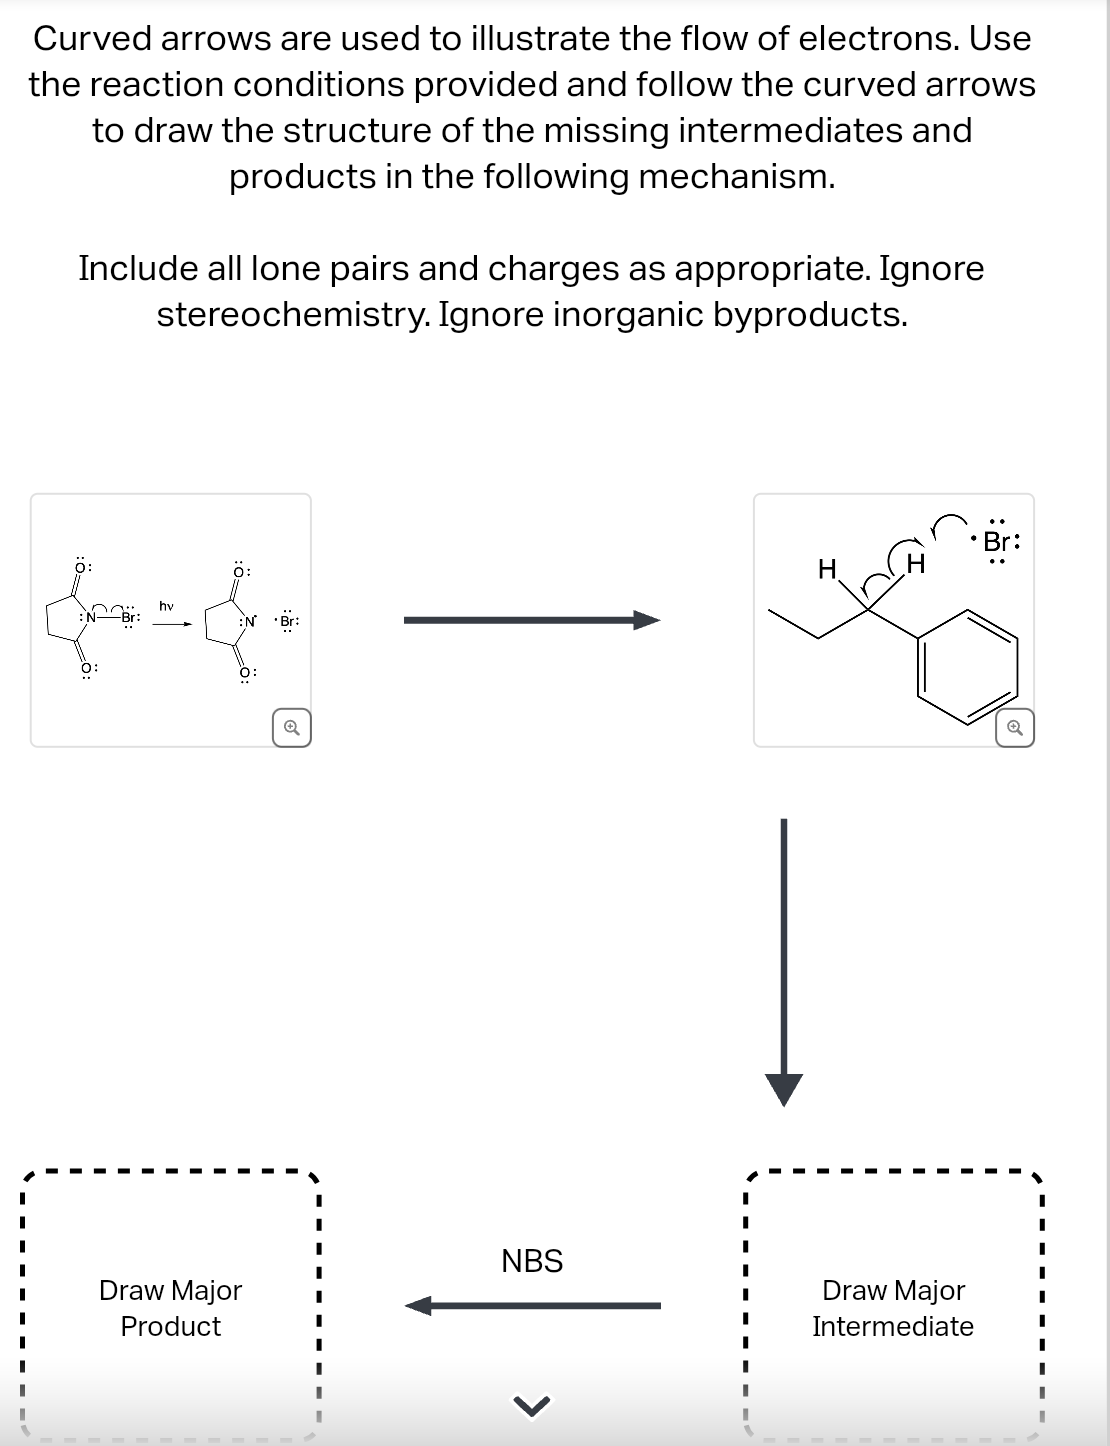 Curved arrows are used to illustrate the flow of electrons. Use
the reaction conditions provided and follow the curved arrows
to draw the structure of the missing intermediates and
products in the following mechanism.
Include all lone pairs and charges as appropriate. Ignore
stereochemistry. Ignore inorganic byproducts.
O:
hv
0:
N° Br:
O:
Draw Major
Product
I
NBS
Draw Major
Intermediate